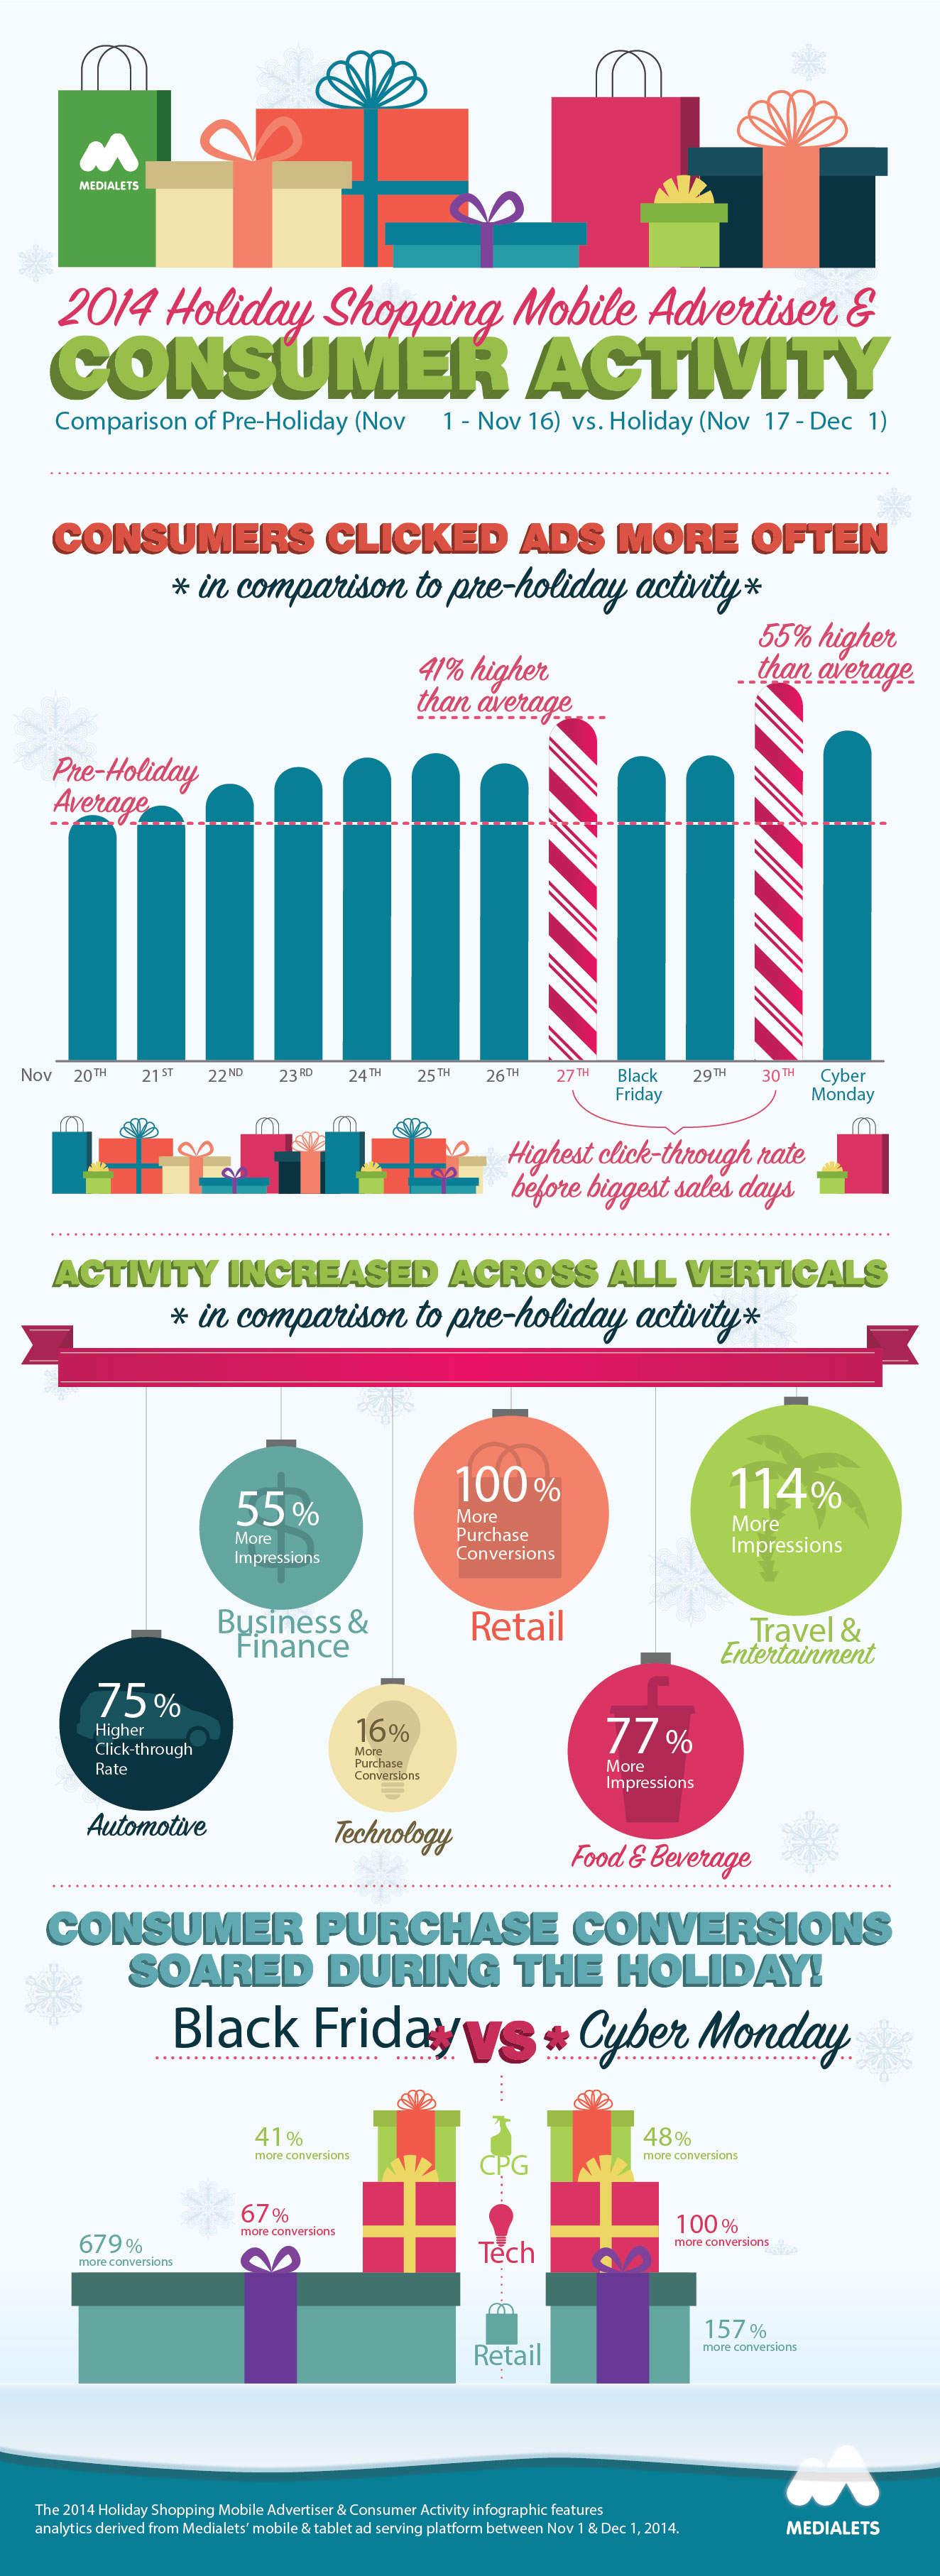 Infographic: Mobile Ad Clicks 55 per cent Higher Before Cyber Monday